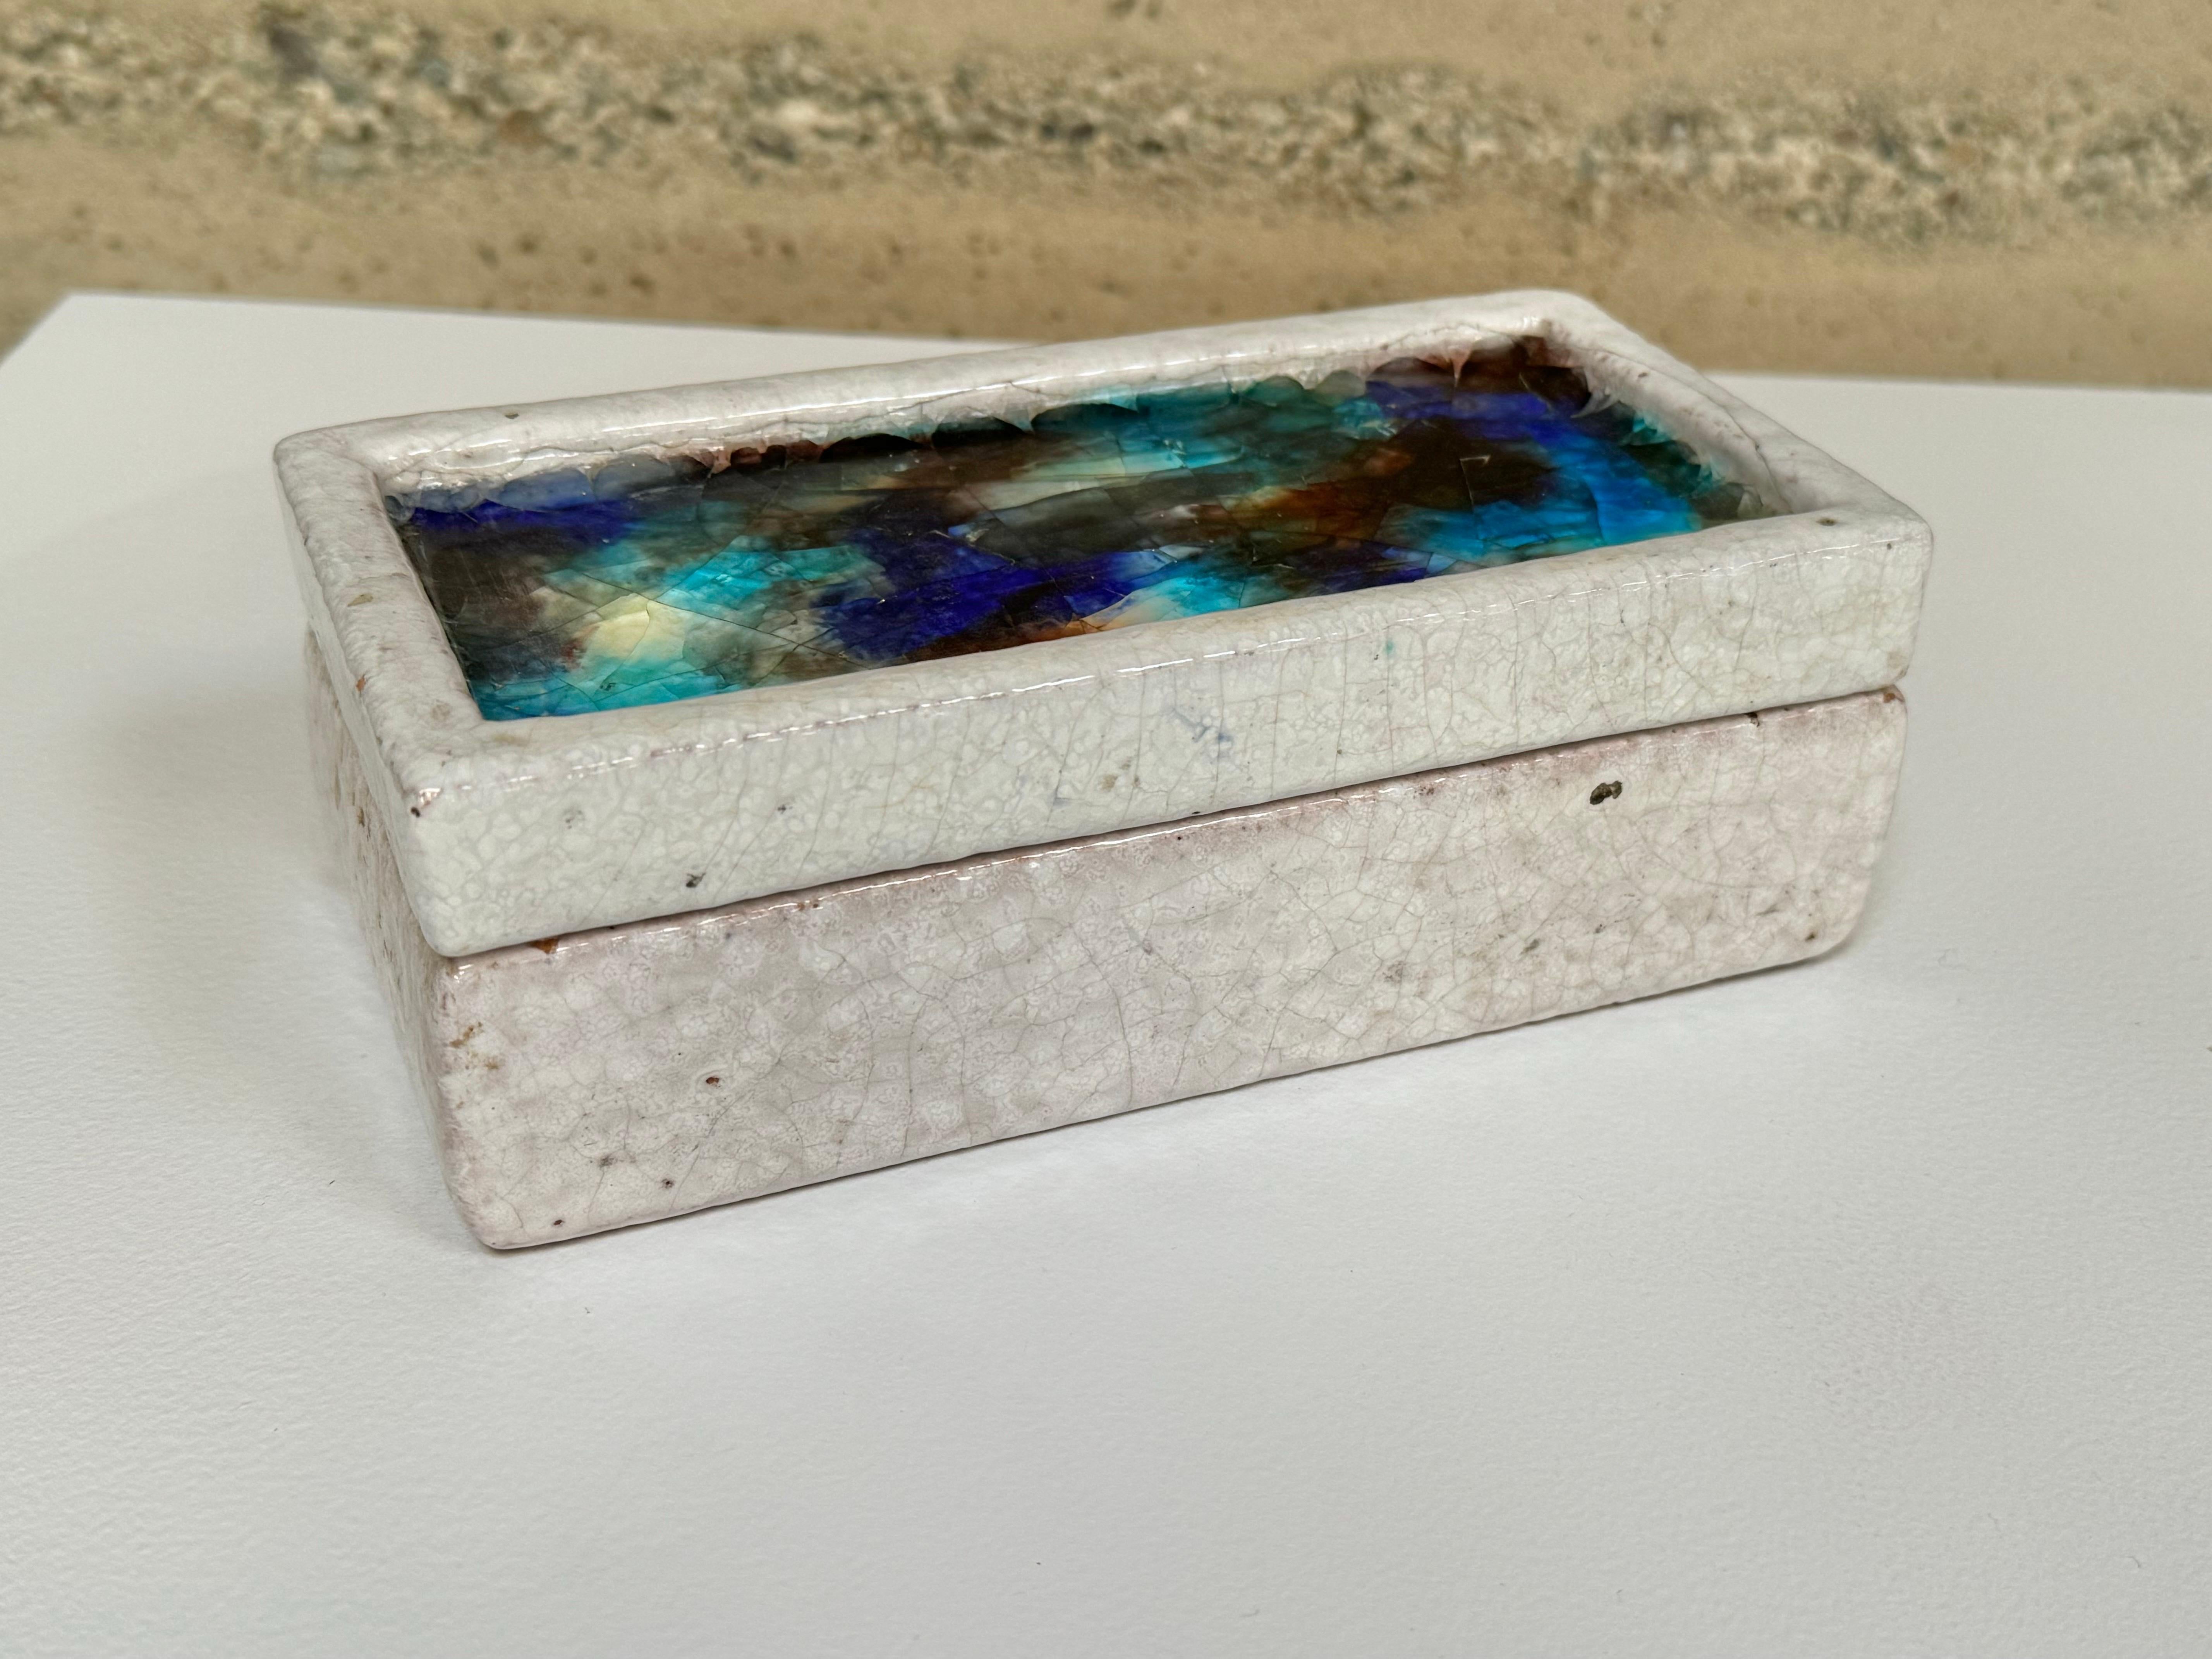 Ceramic lidded box designed by Guido Bitossi and sold by Raymor, circa 1950s. The lidded box has a colorful fused  glass top and a soft white glaze body and is labeled on the bottom. The glaze is a cracked volcanic with imperfections as part of its